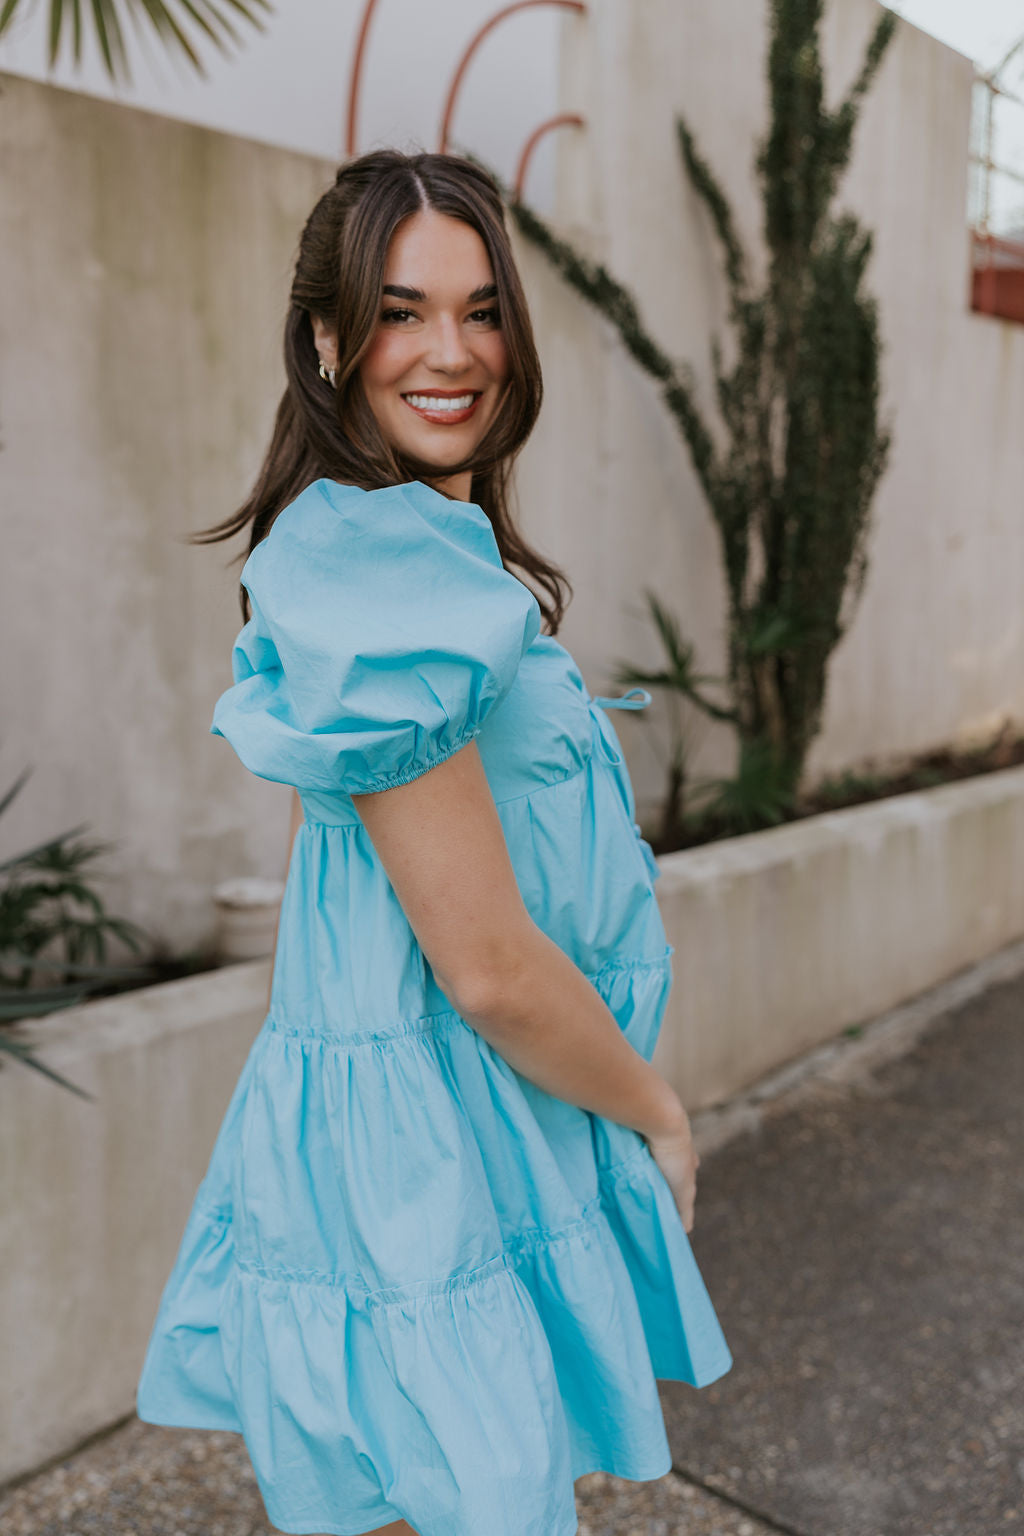 Side view of female model wearing the Gloria Light Blue Short Sleeve Mini Dress which features aqua blue cotton fabric, aqua blue lining, mini length, ruffle tiered details, a sweetheart neckline with drawstring ties, a smocked back, and short puff sleeves.